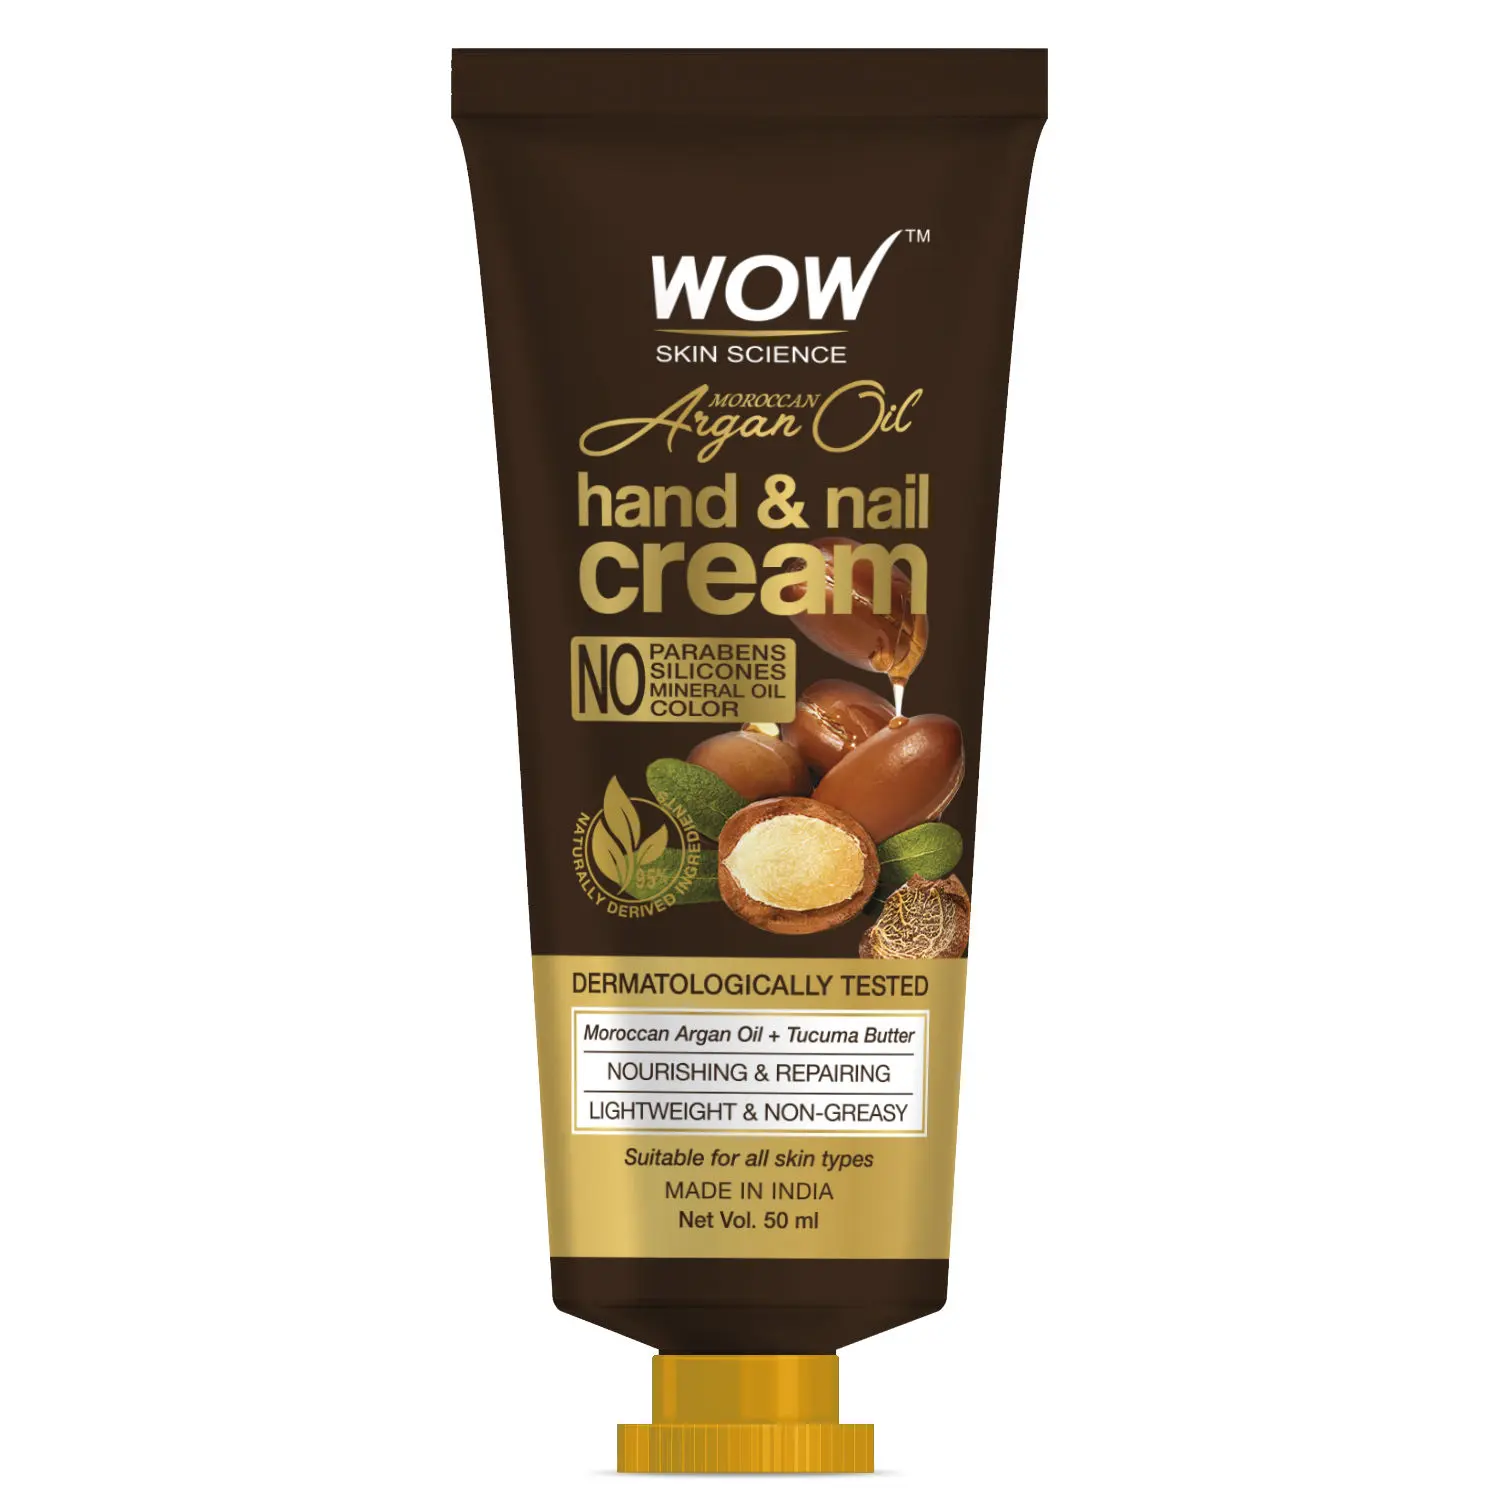 WOW Skin Science Moroccan Argan Oil Hand & Nail Cream - Nourishing & Repairing - Lightweight & Non-Greasy - Quick Absorb - for All Skin Types - No Parabens, Silicones, Mineral Oil & Color - 50mL